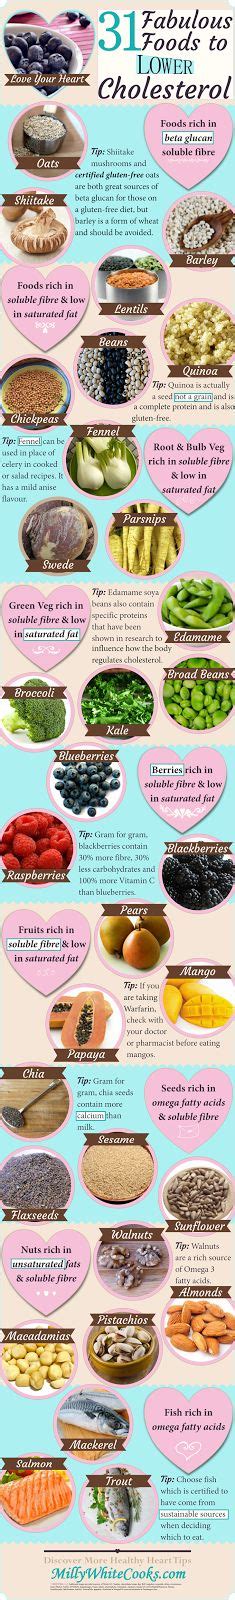 On a diet to lower your cholesterol? Low Saturated Fat Foods Cholesterol - Tiara Transformation ...